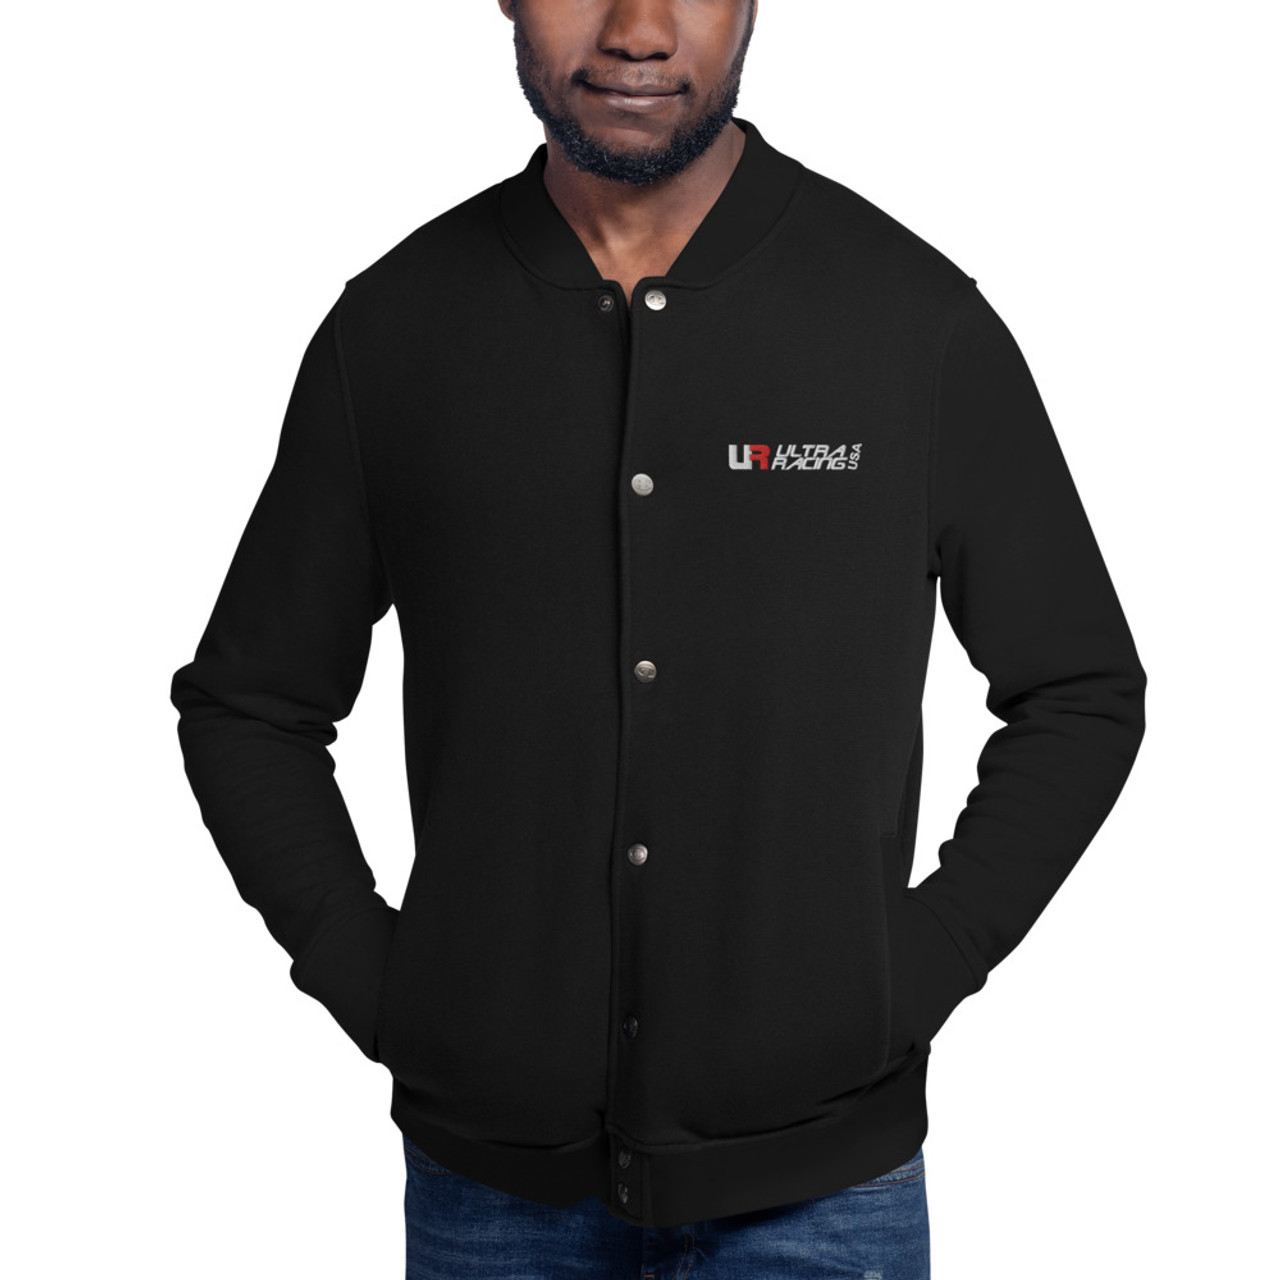 albue linned Gnide EMBROIDERED CHAMPION BOMBER JACKET - ULTRA RACING USA